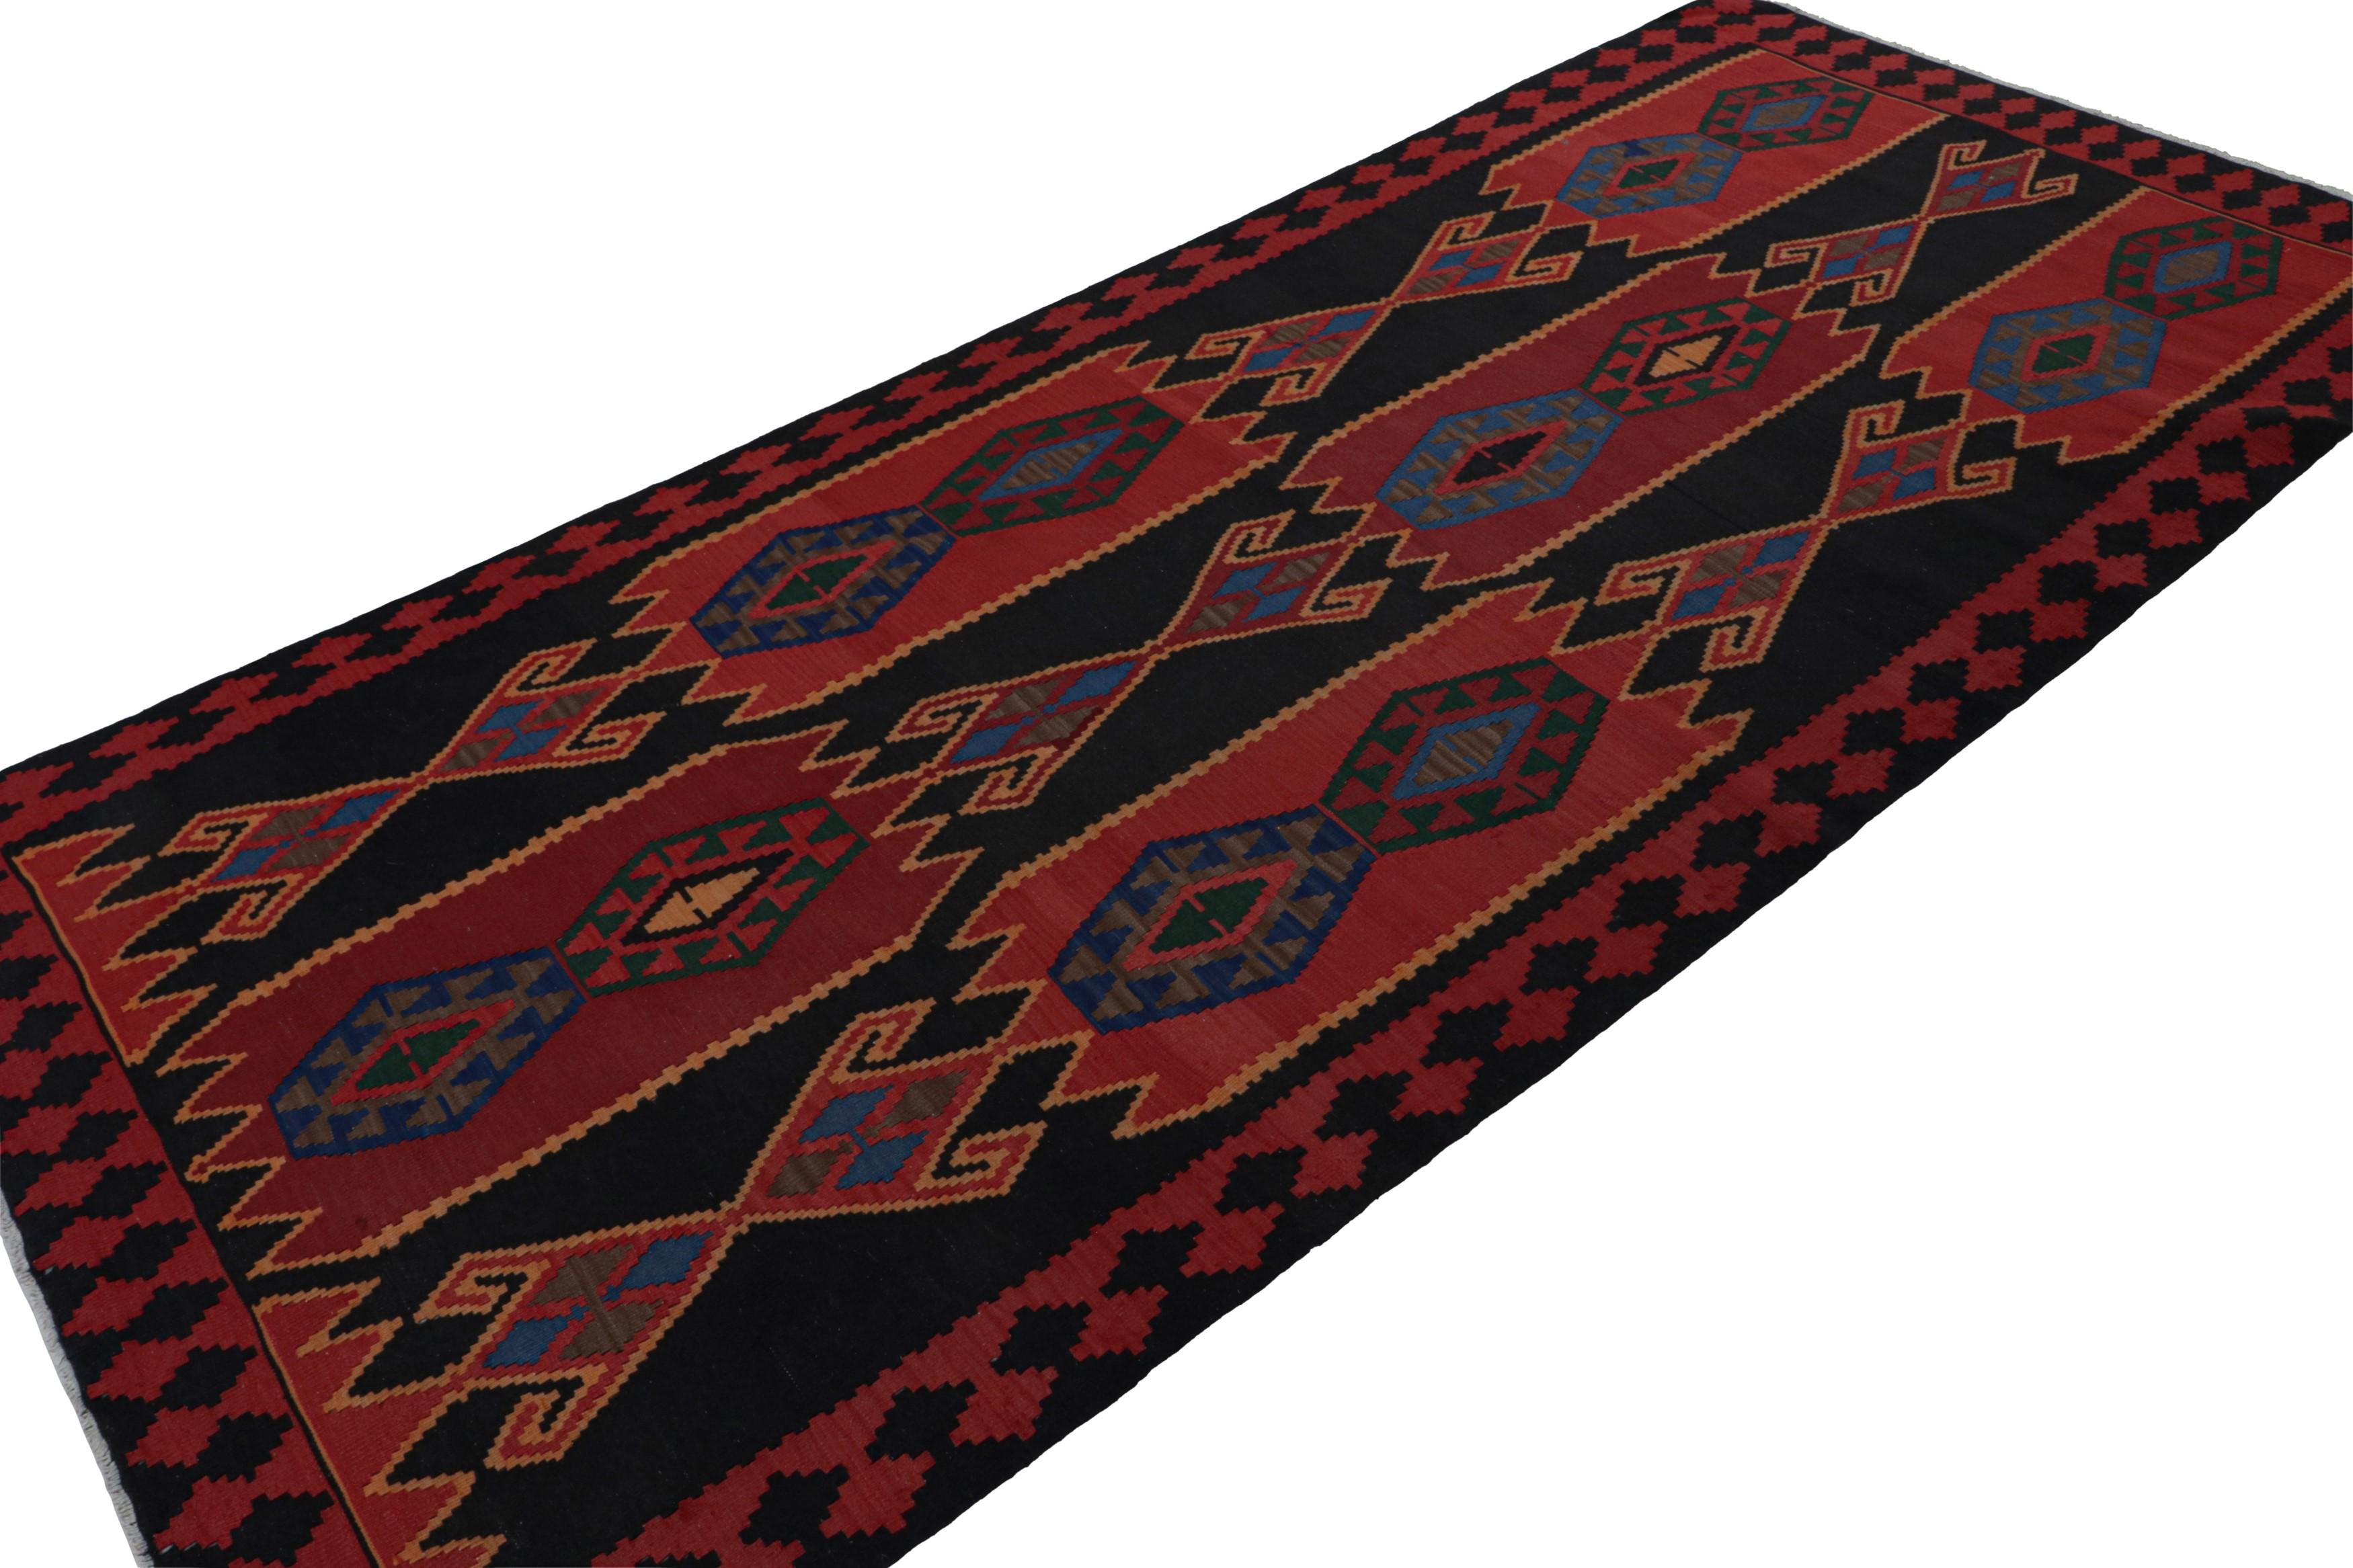 Handwoven in wool, circa 1950-1960, this 5x12 vintage Afghan tribal kilim rug features a minimal palette of rich red and blue with a black field. 

On the design: 

As an exciting curation in the Rug & Kilim Collection, this rug is a very personal